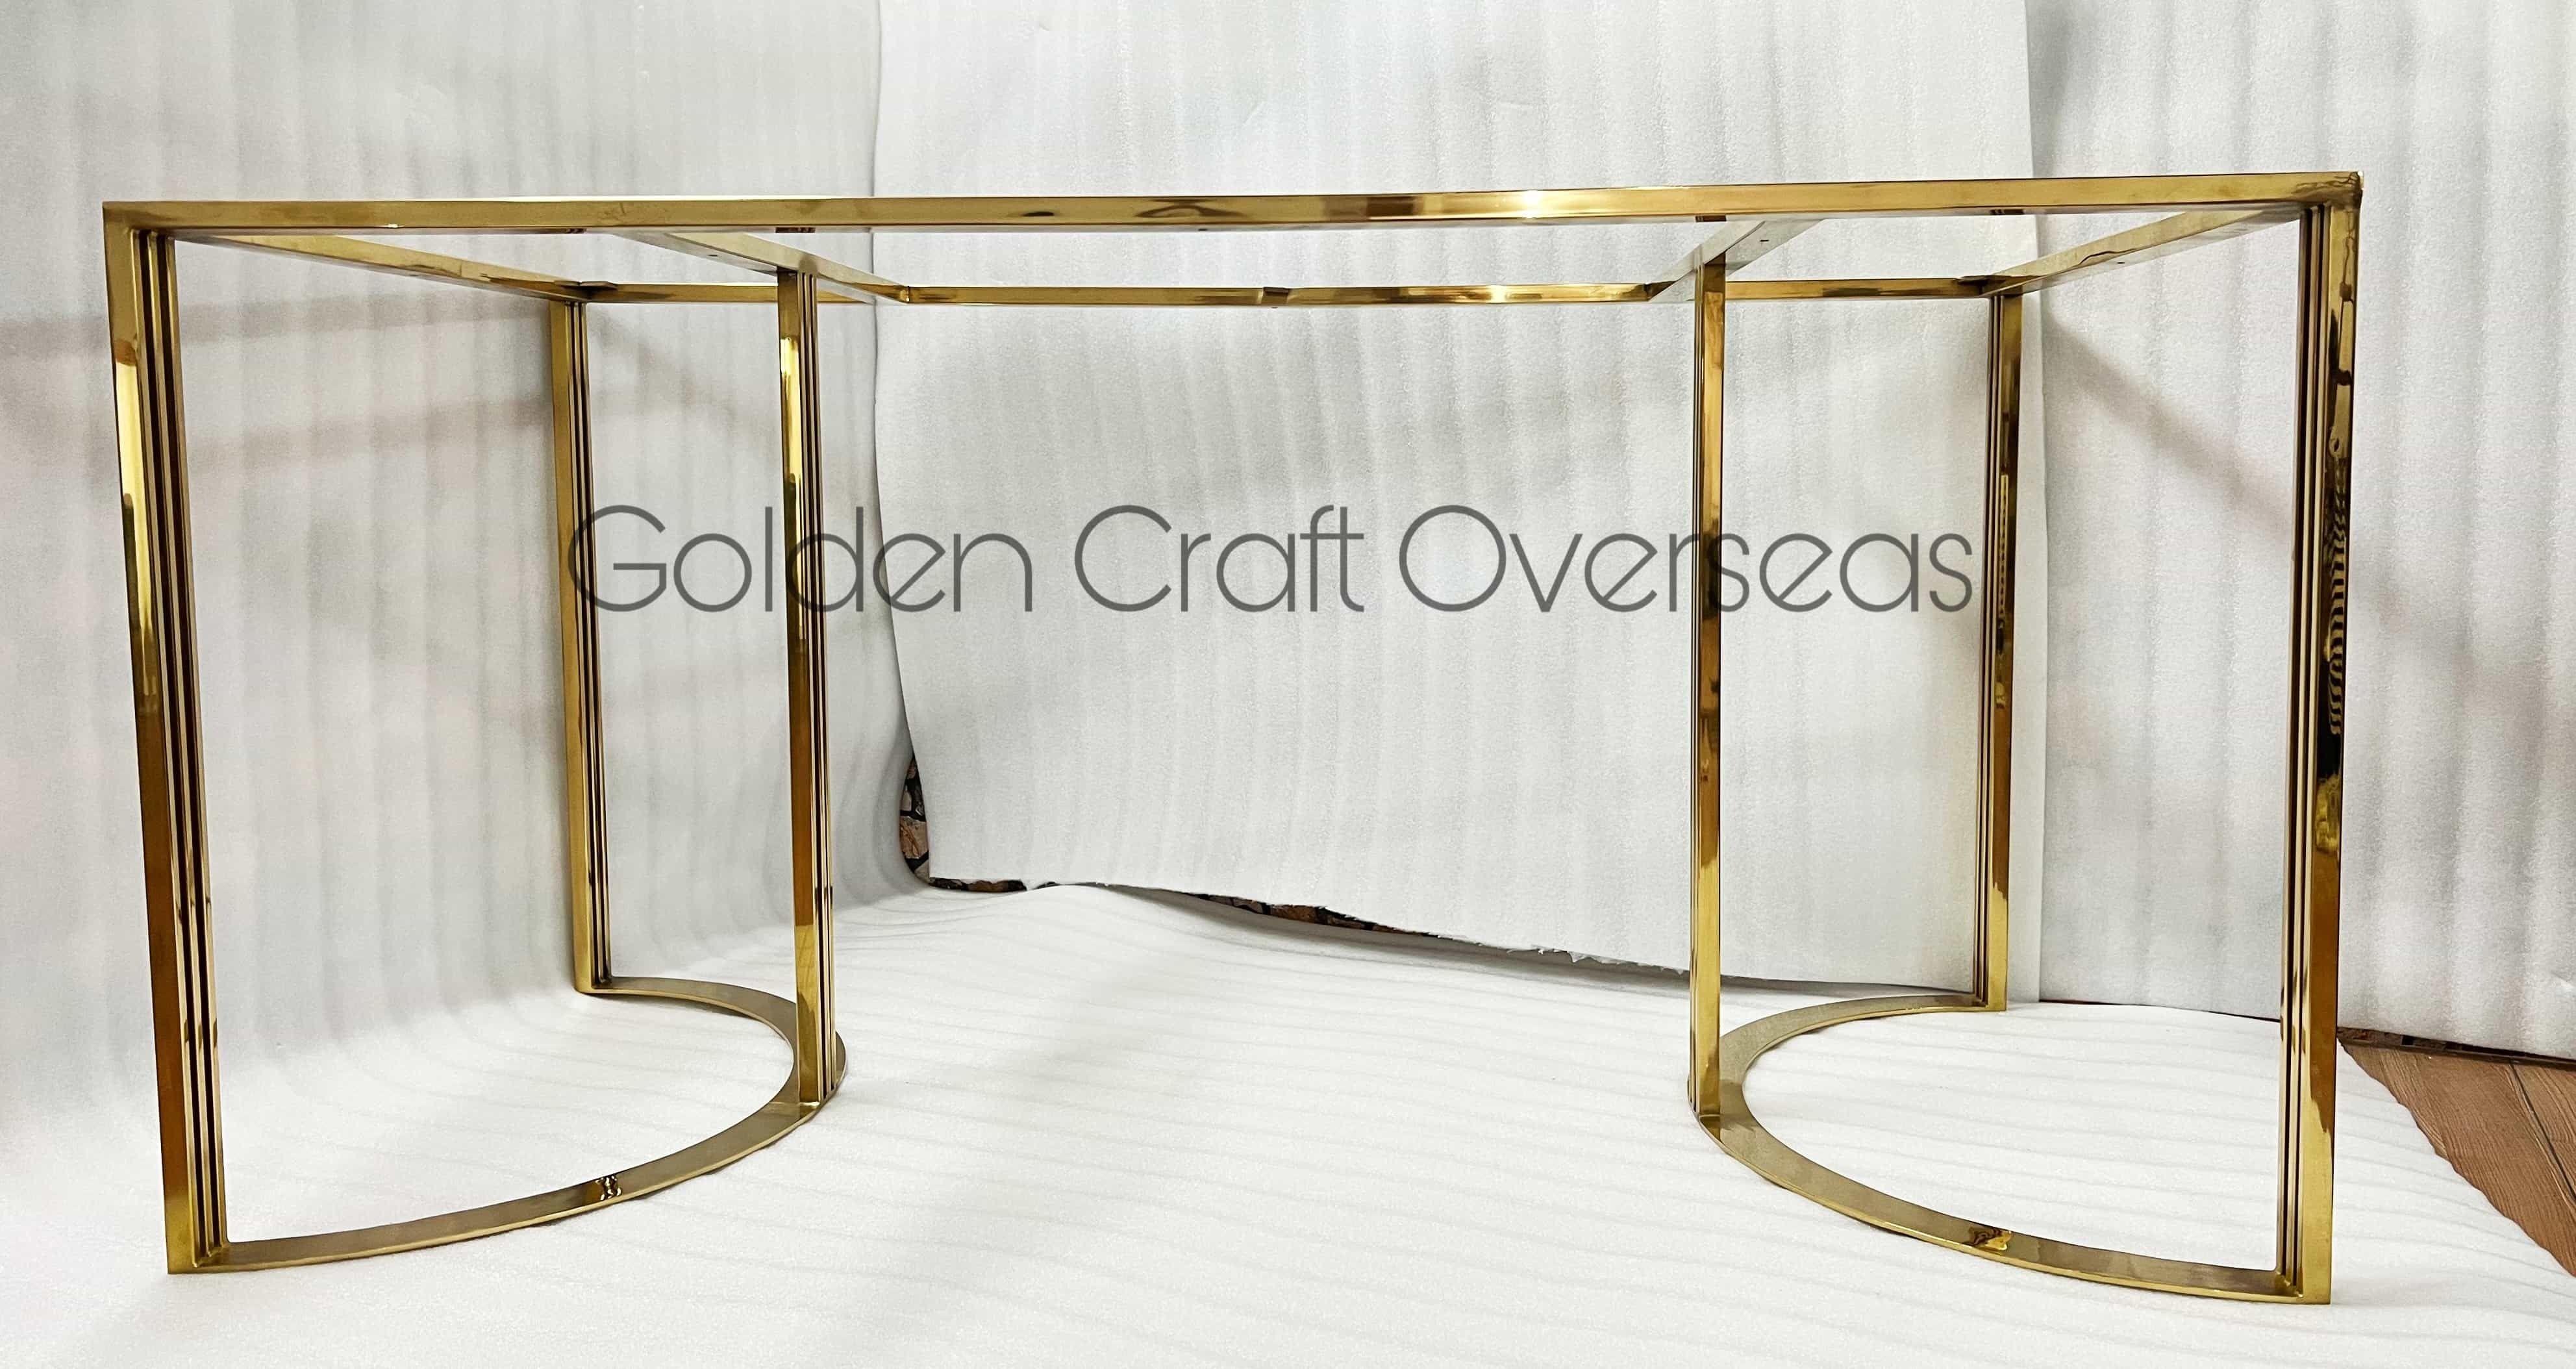 PVD Dinning Table frame in Stainless Steel for high end interior work